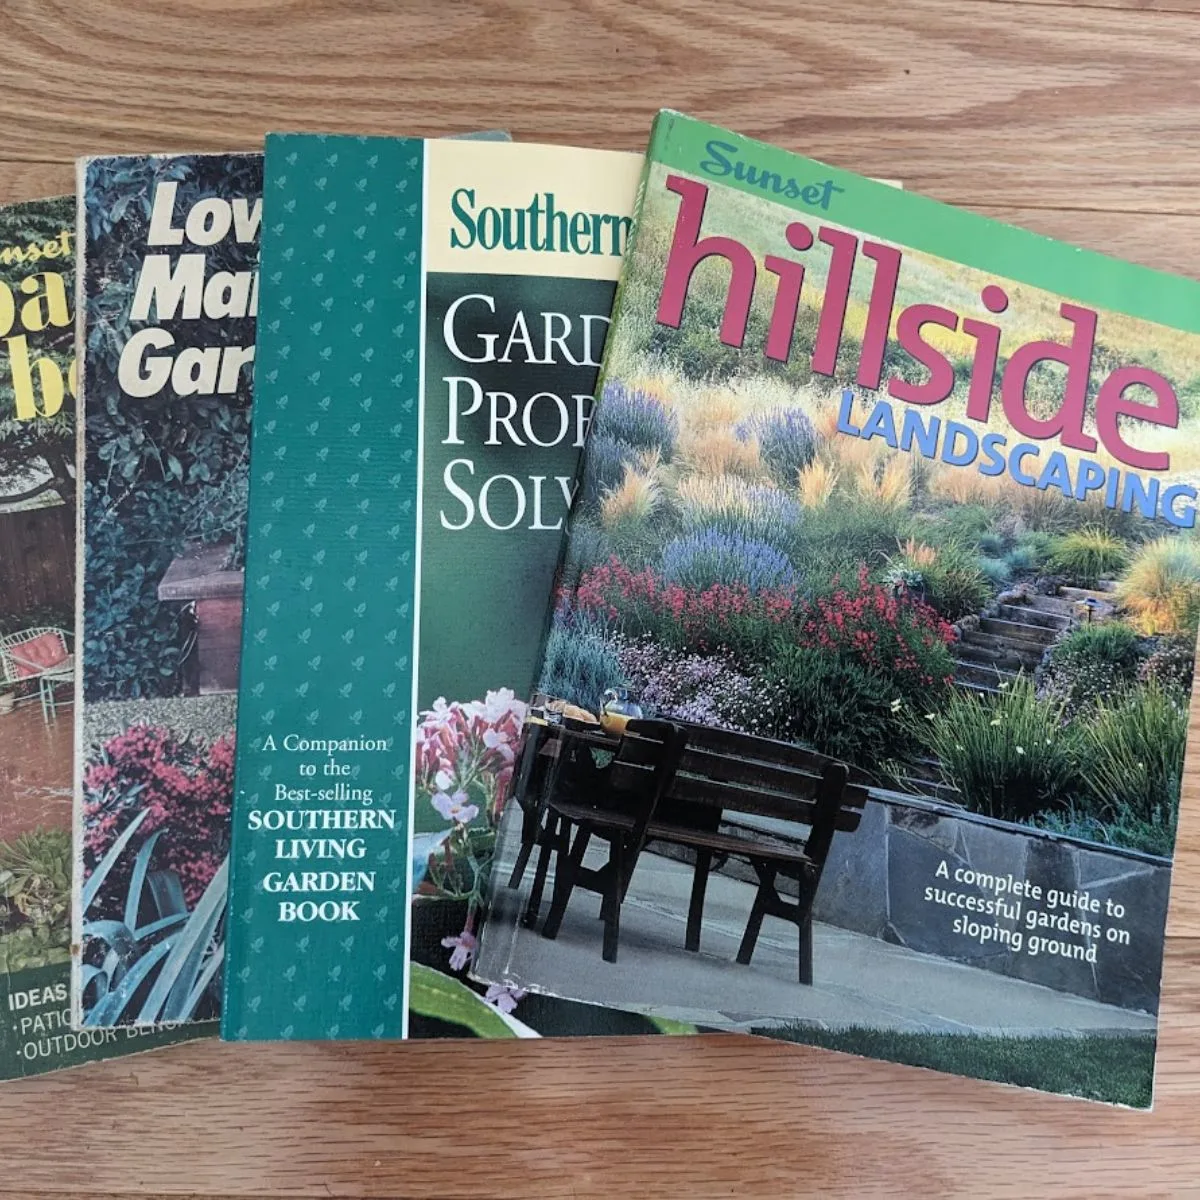 Gardening magazines laying on a wooden floor. 